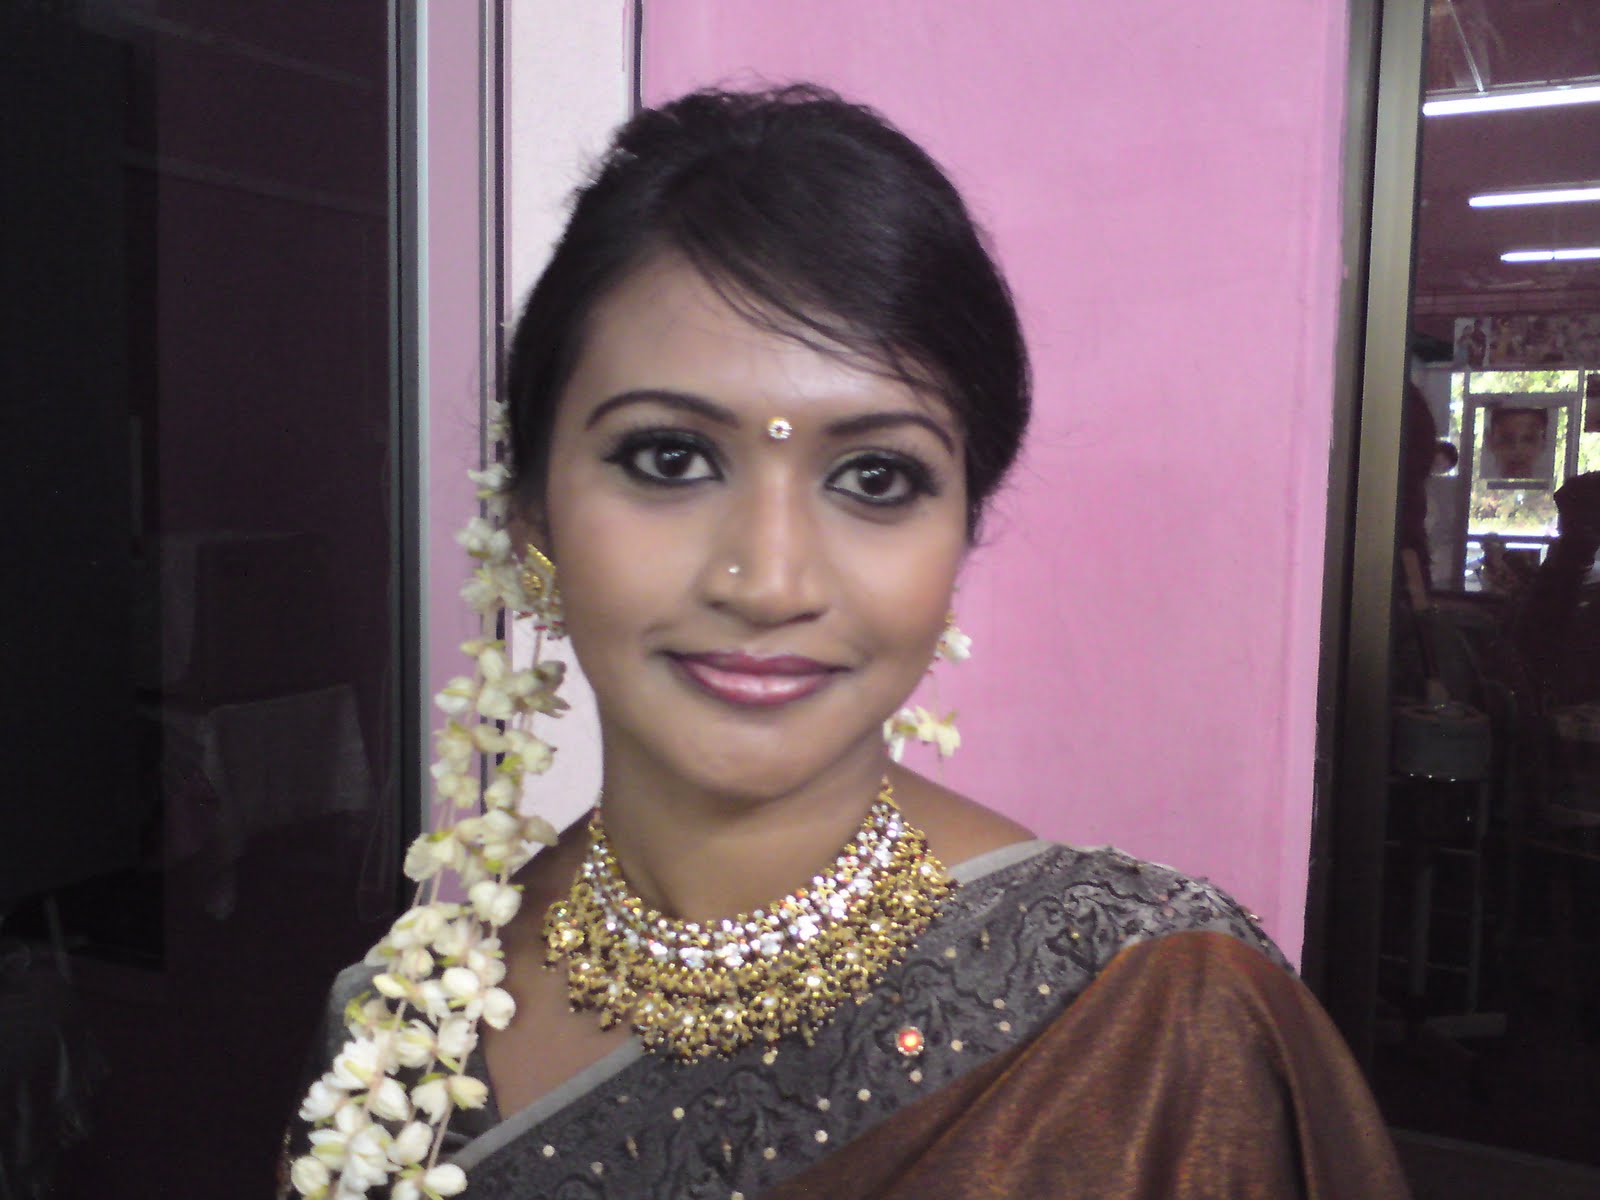 Hairstyles For Women With Long Hair 2013 Simple Tamil Bridal Plait Hairstyle With Jasmine Flowers